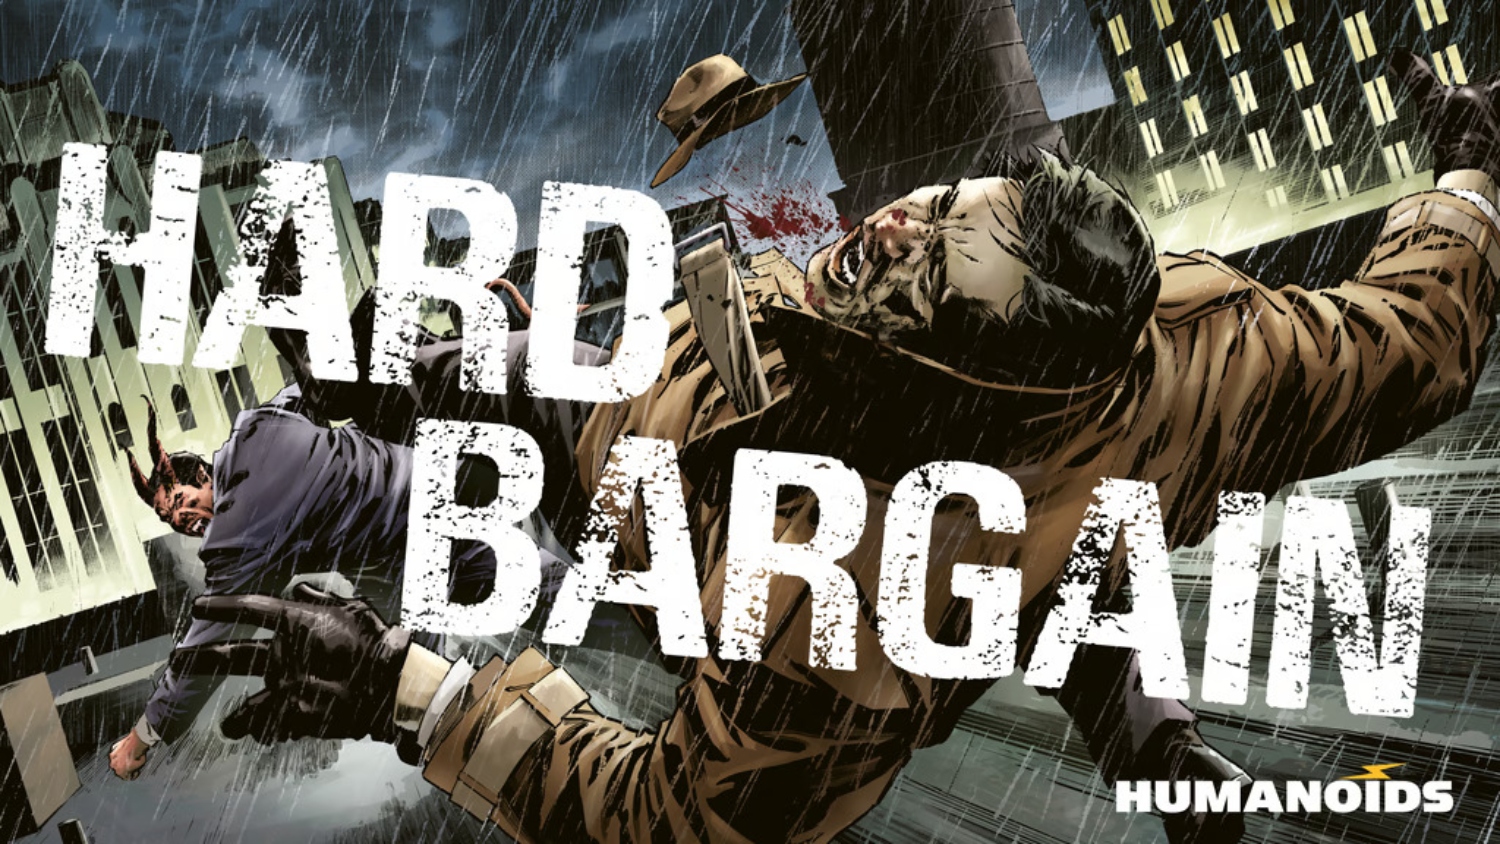 Steven S. DeKnight talks pulp vibes, demons, and grizzled leads in 'Hard Bargain'